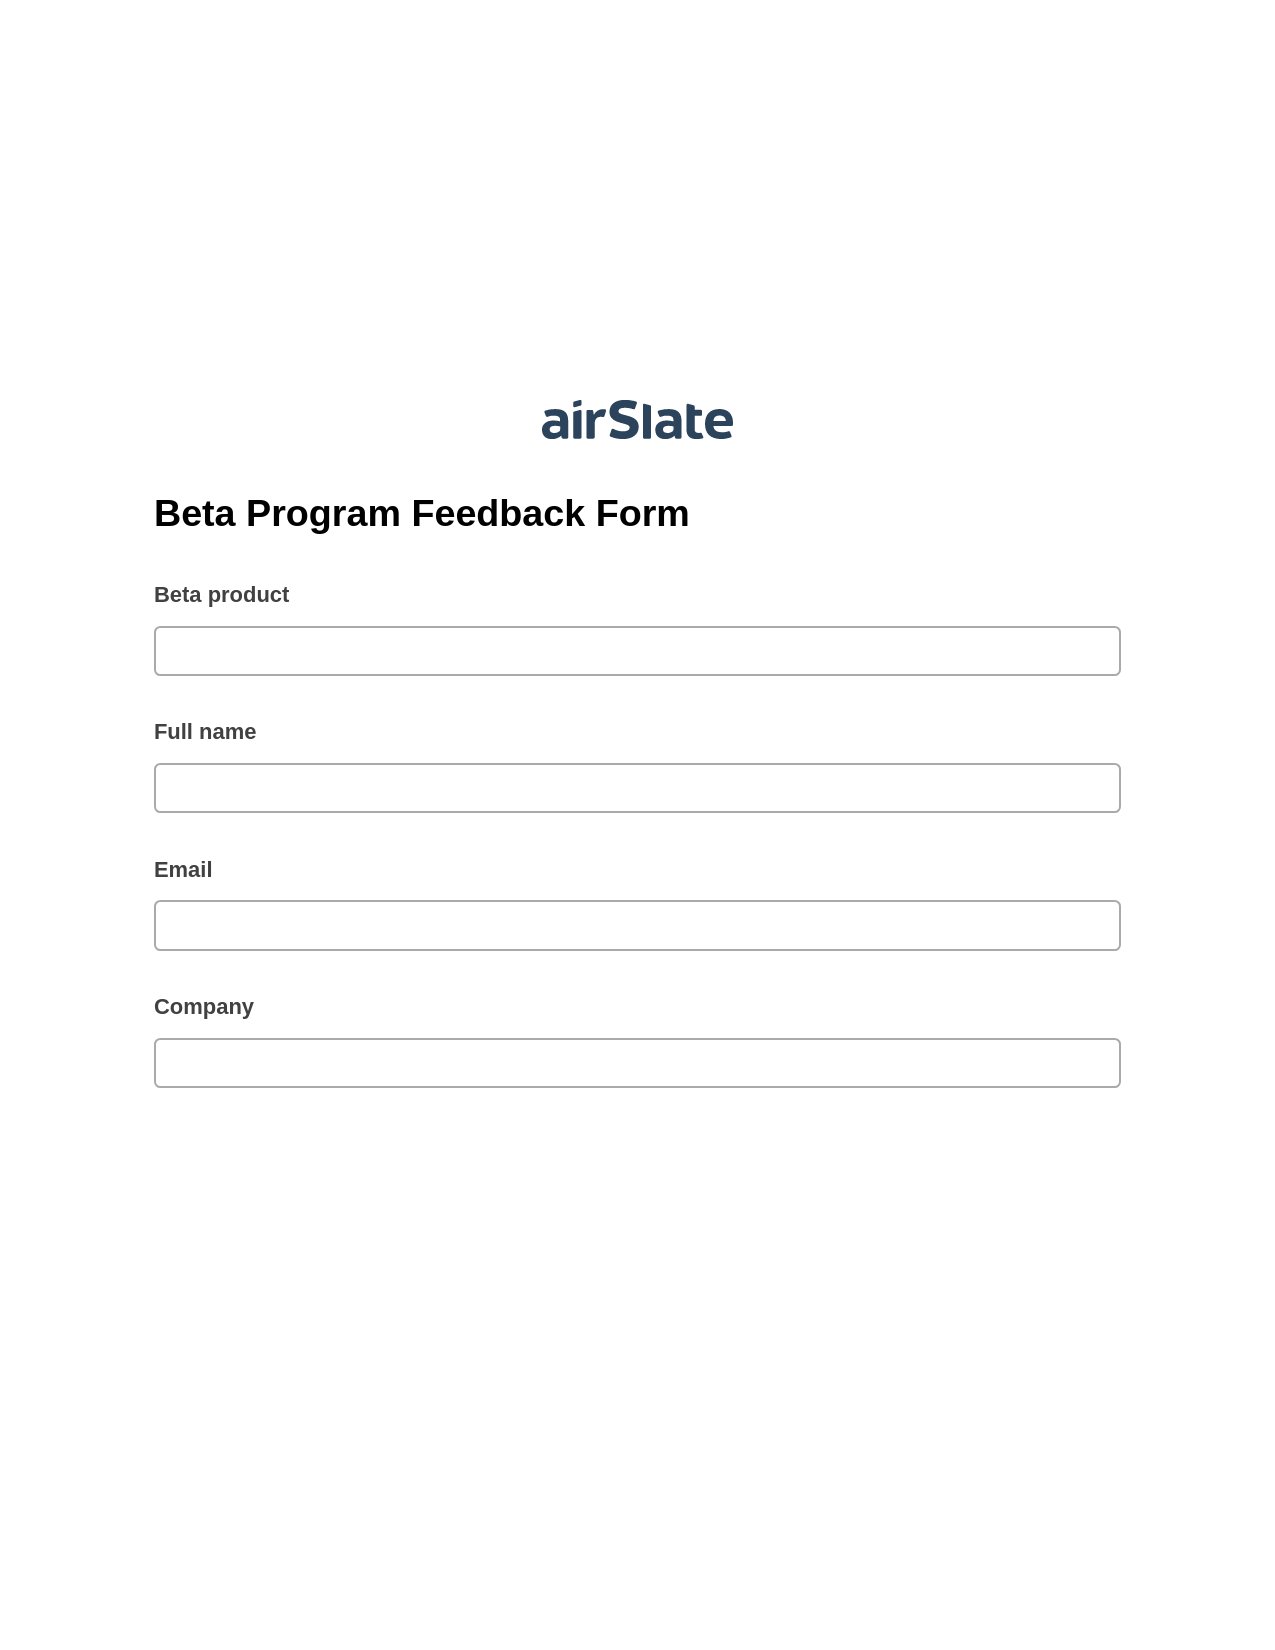 Multirole Beta Program Feedback Form Pre-fill Slate from MS Dynamics 365 Records Bot, Send a Slate to Salesforce Contact Bot, Archive to SharePoint Folder Bot